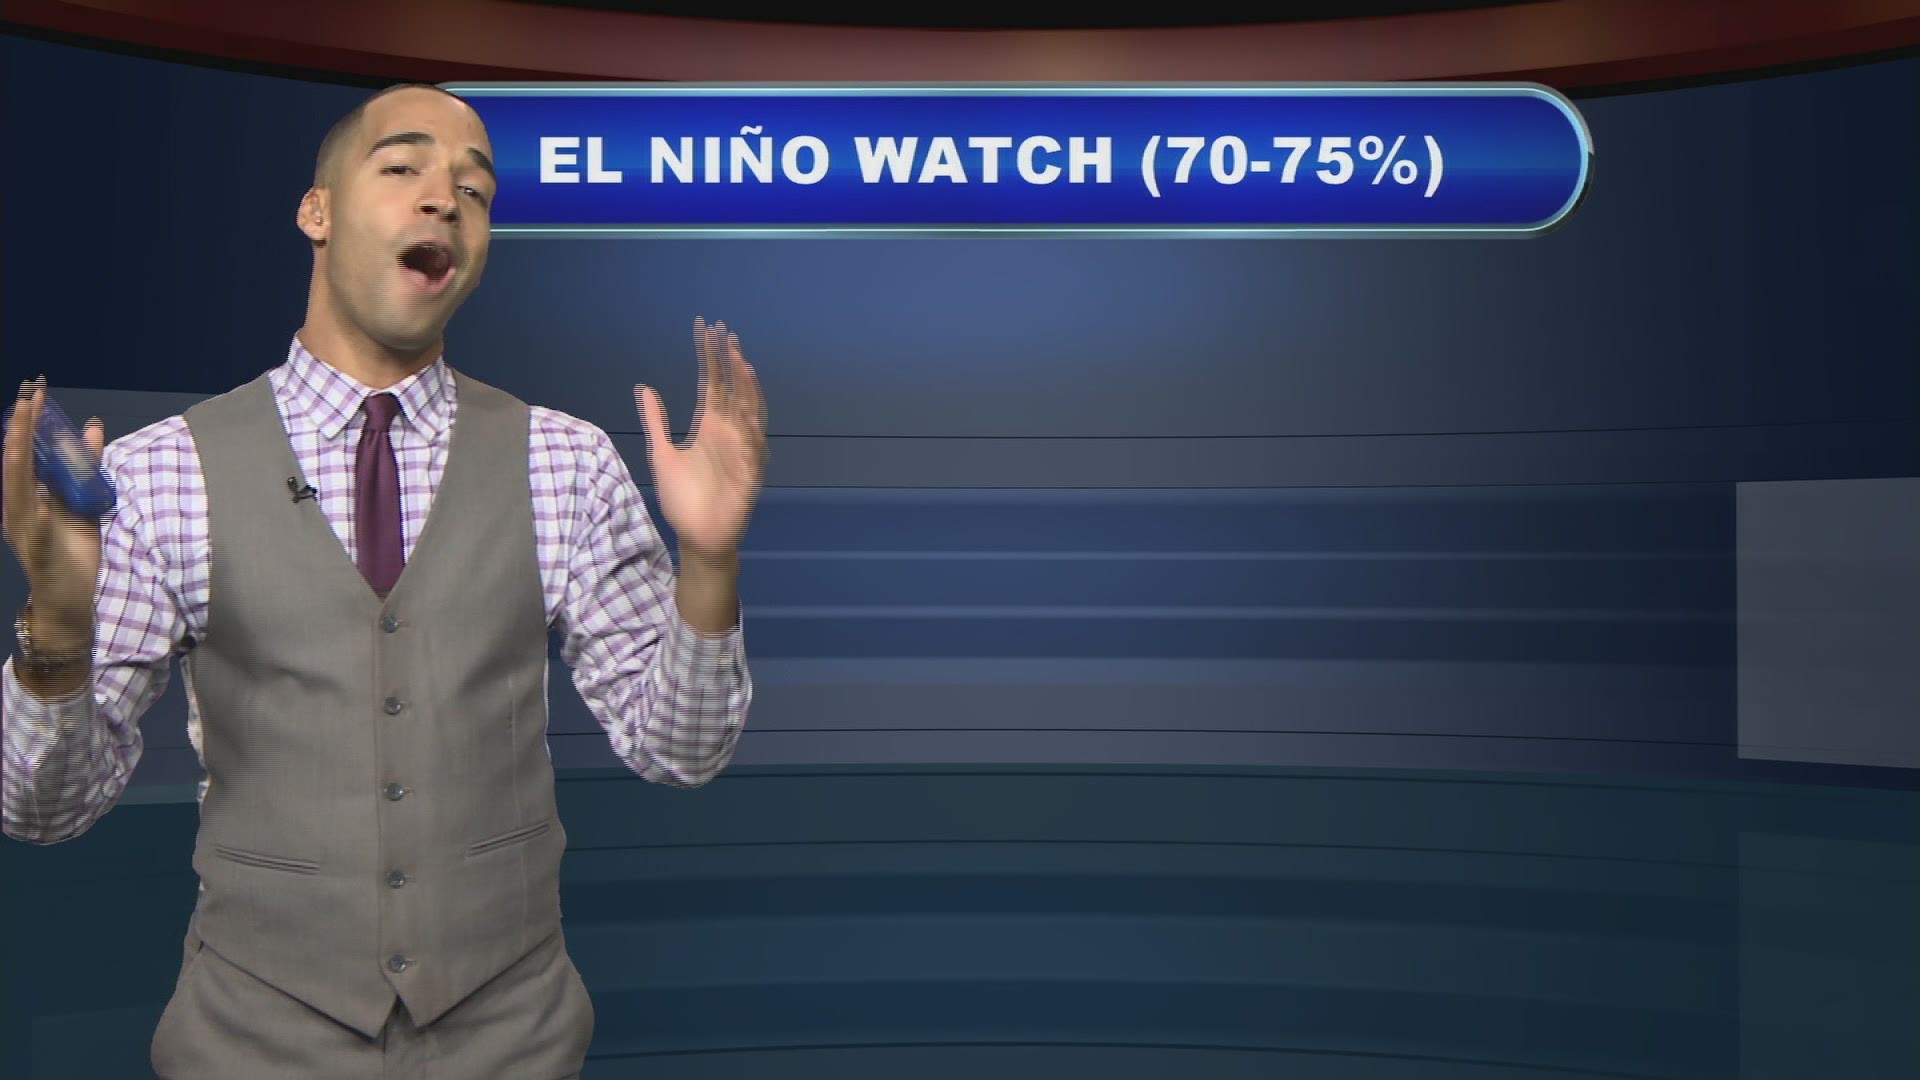 Michael Estime takes a closer look at the El Nino pattern for this upcoming winter and how it will impact Northeast Ohio this upcoming 2018-2019 winter season.